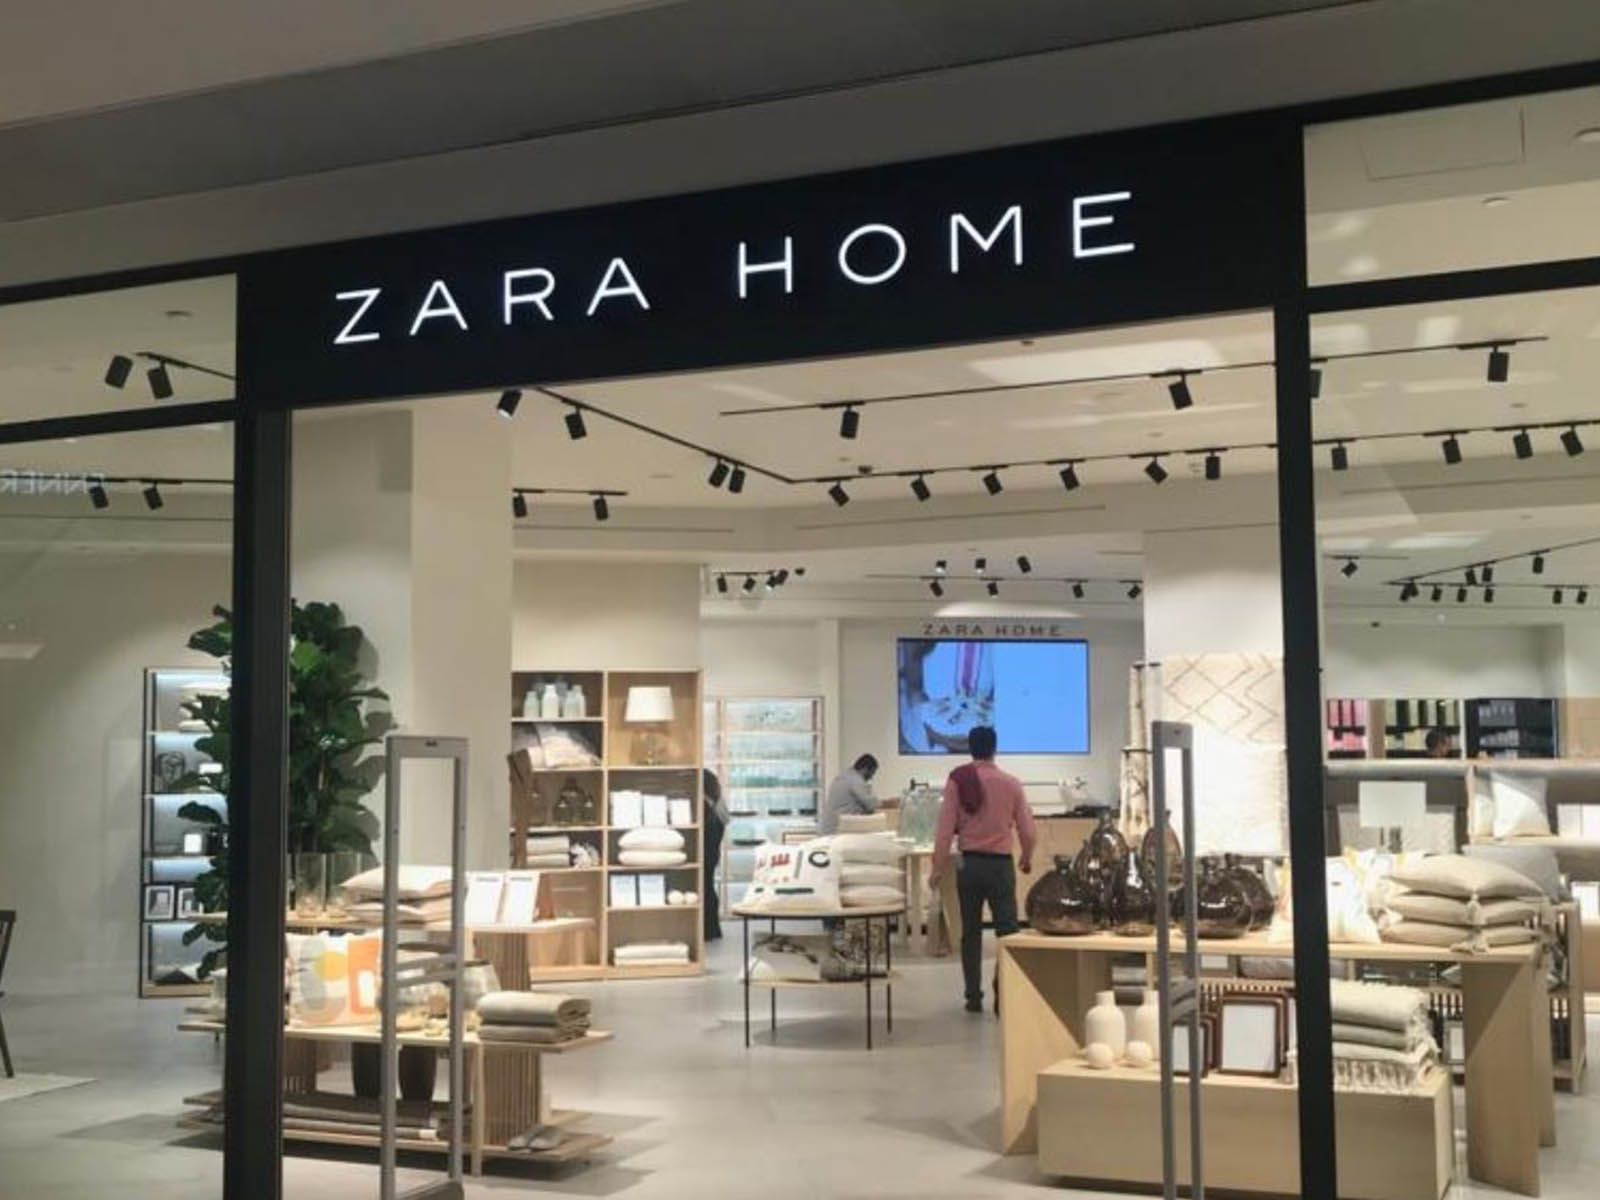 Zara Home Madrid opens its new shop for&from